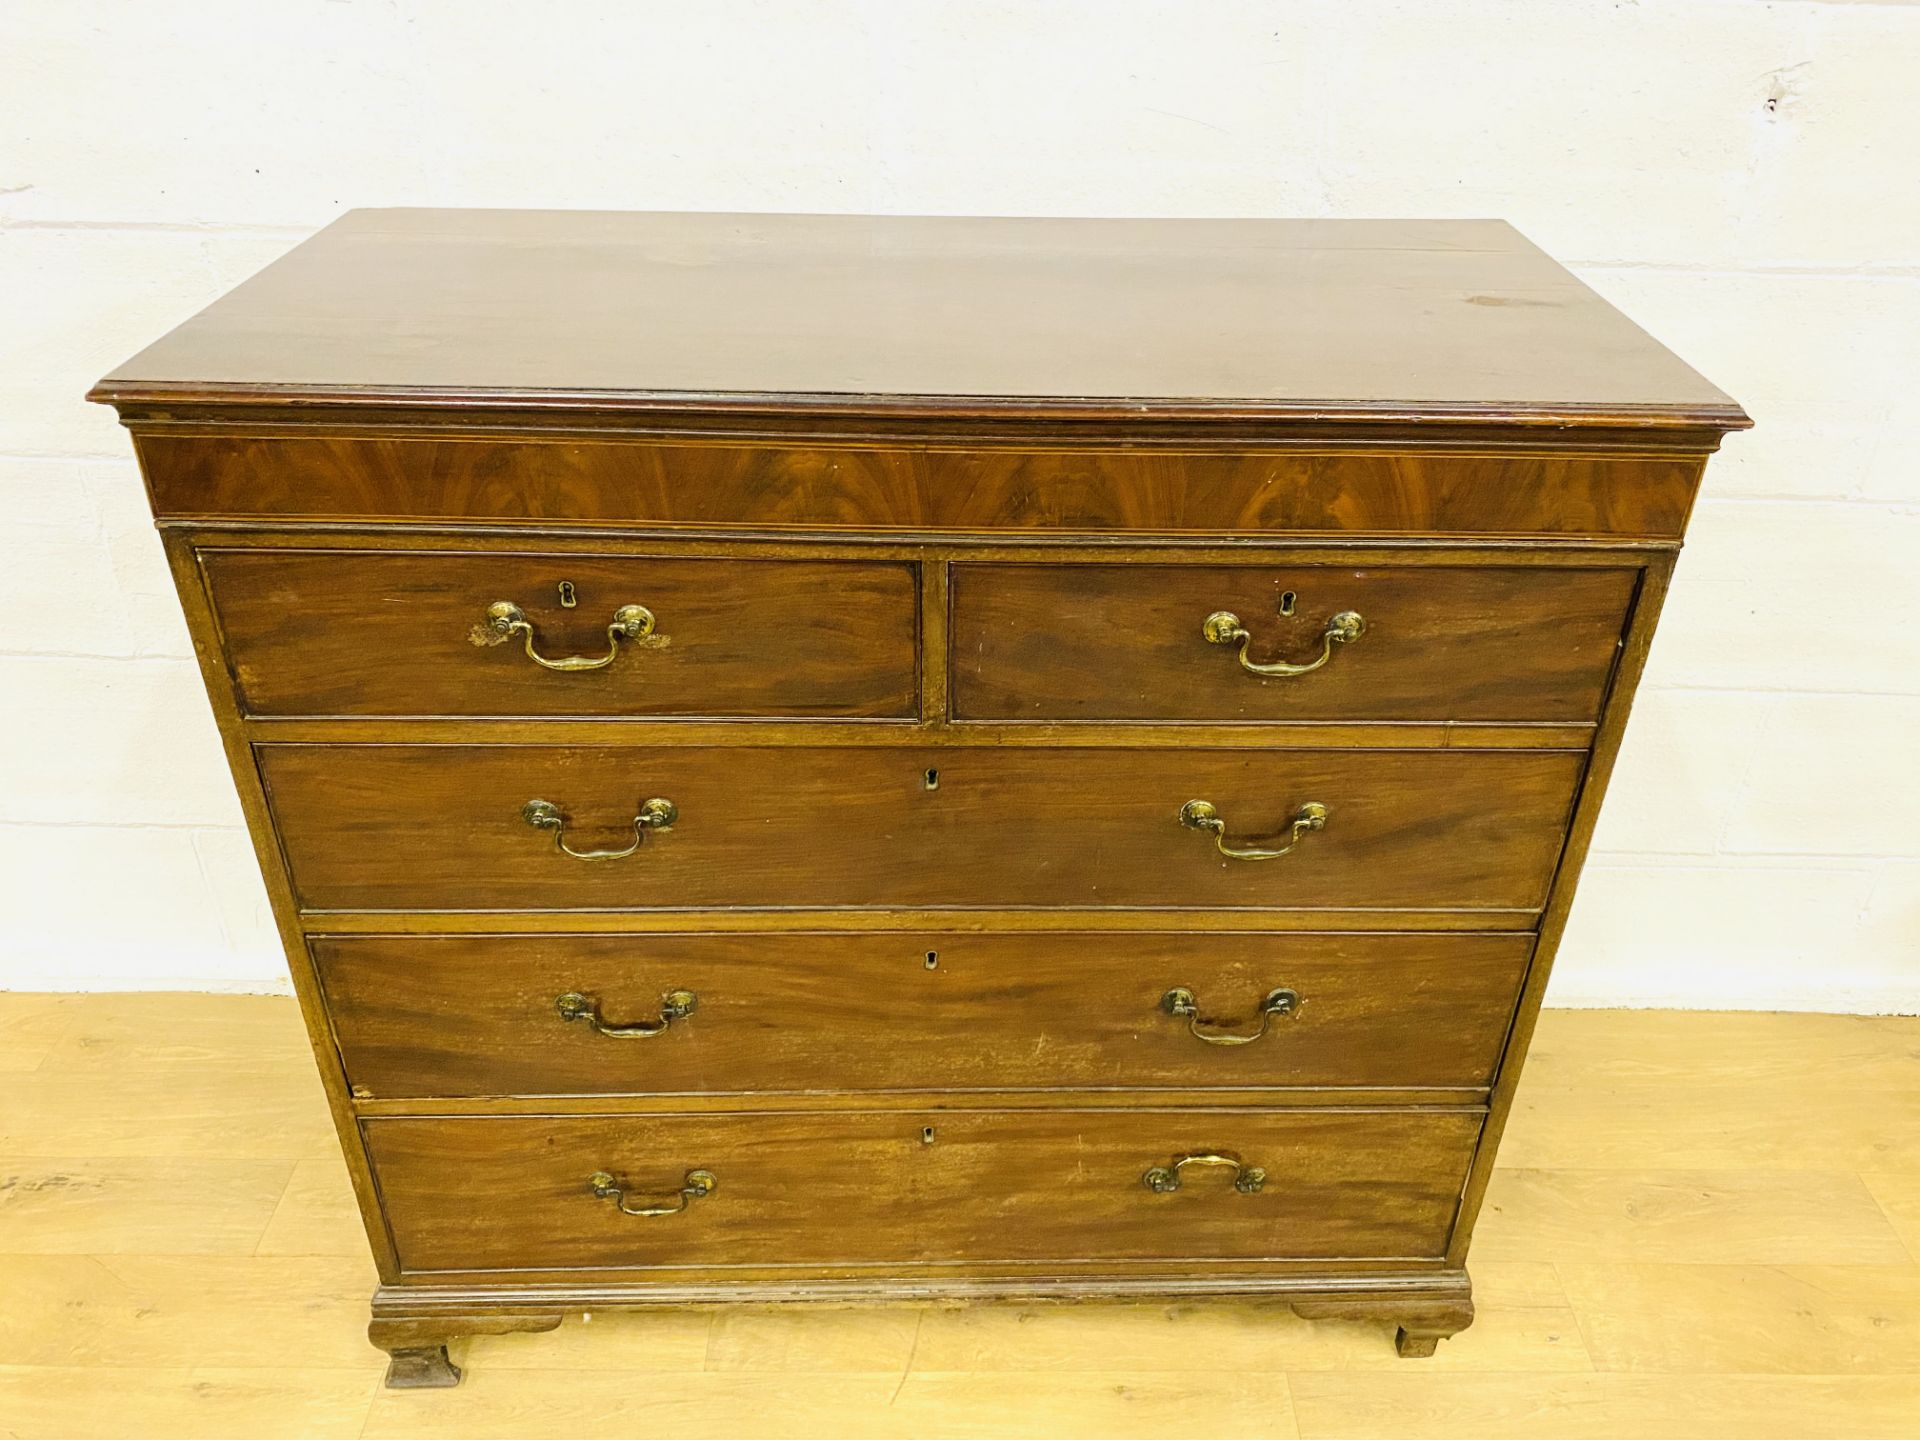 Mahogany chest of drawers - Image 2 of 7